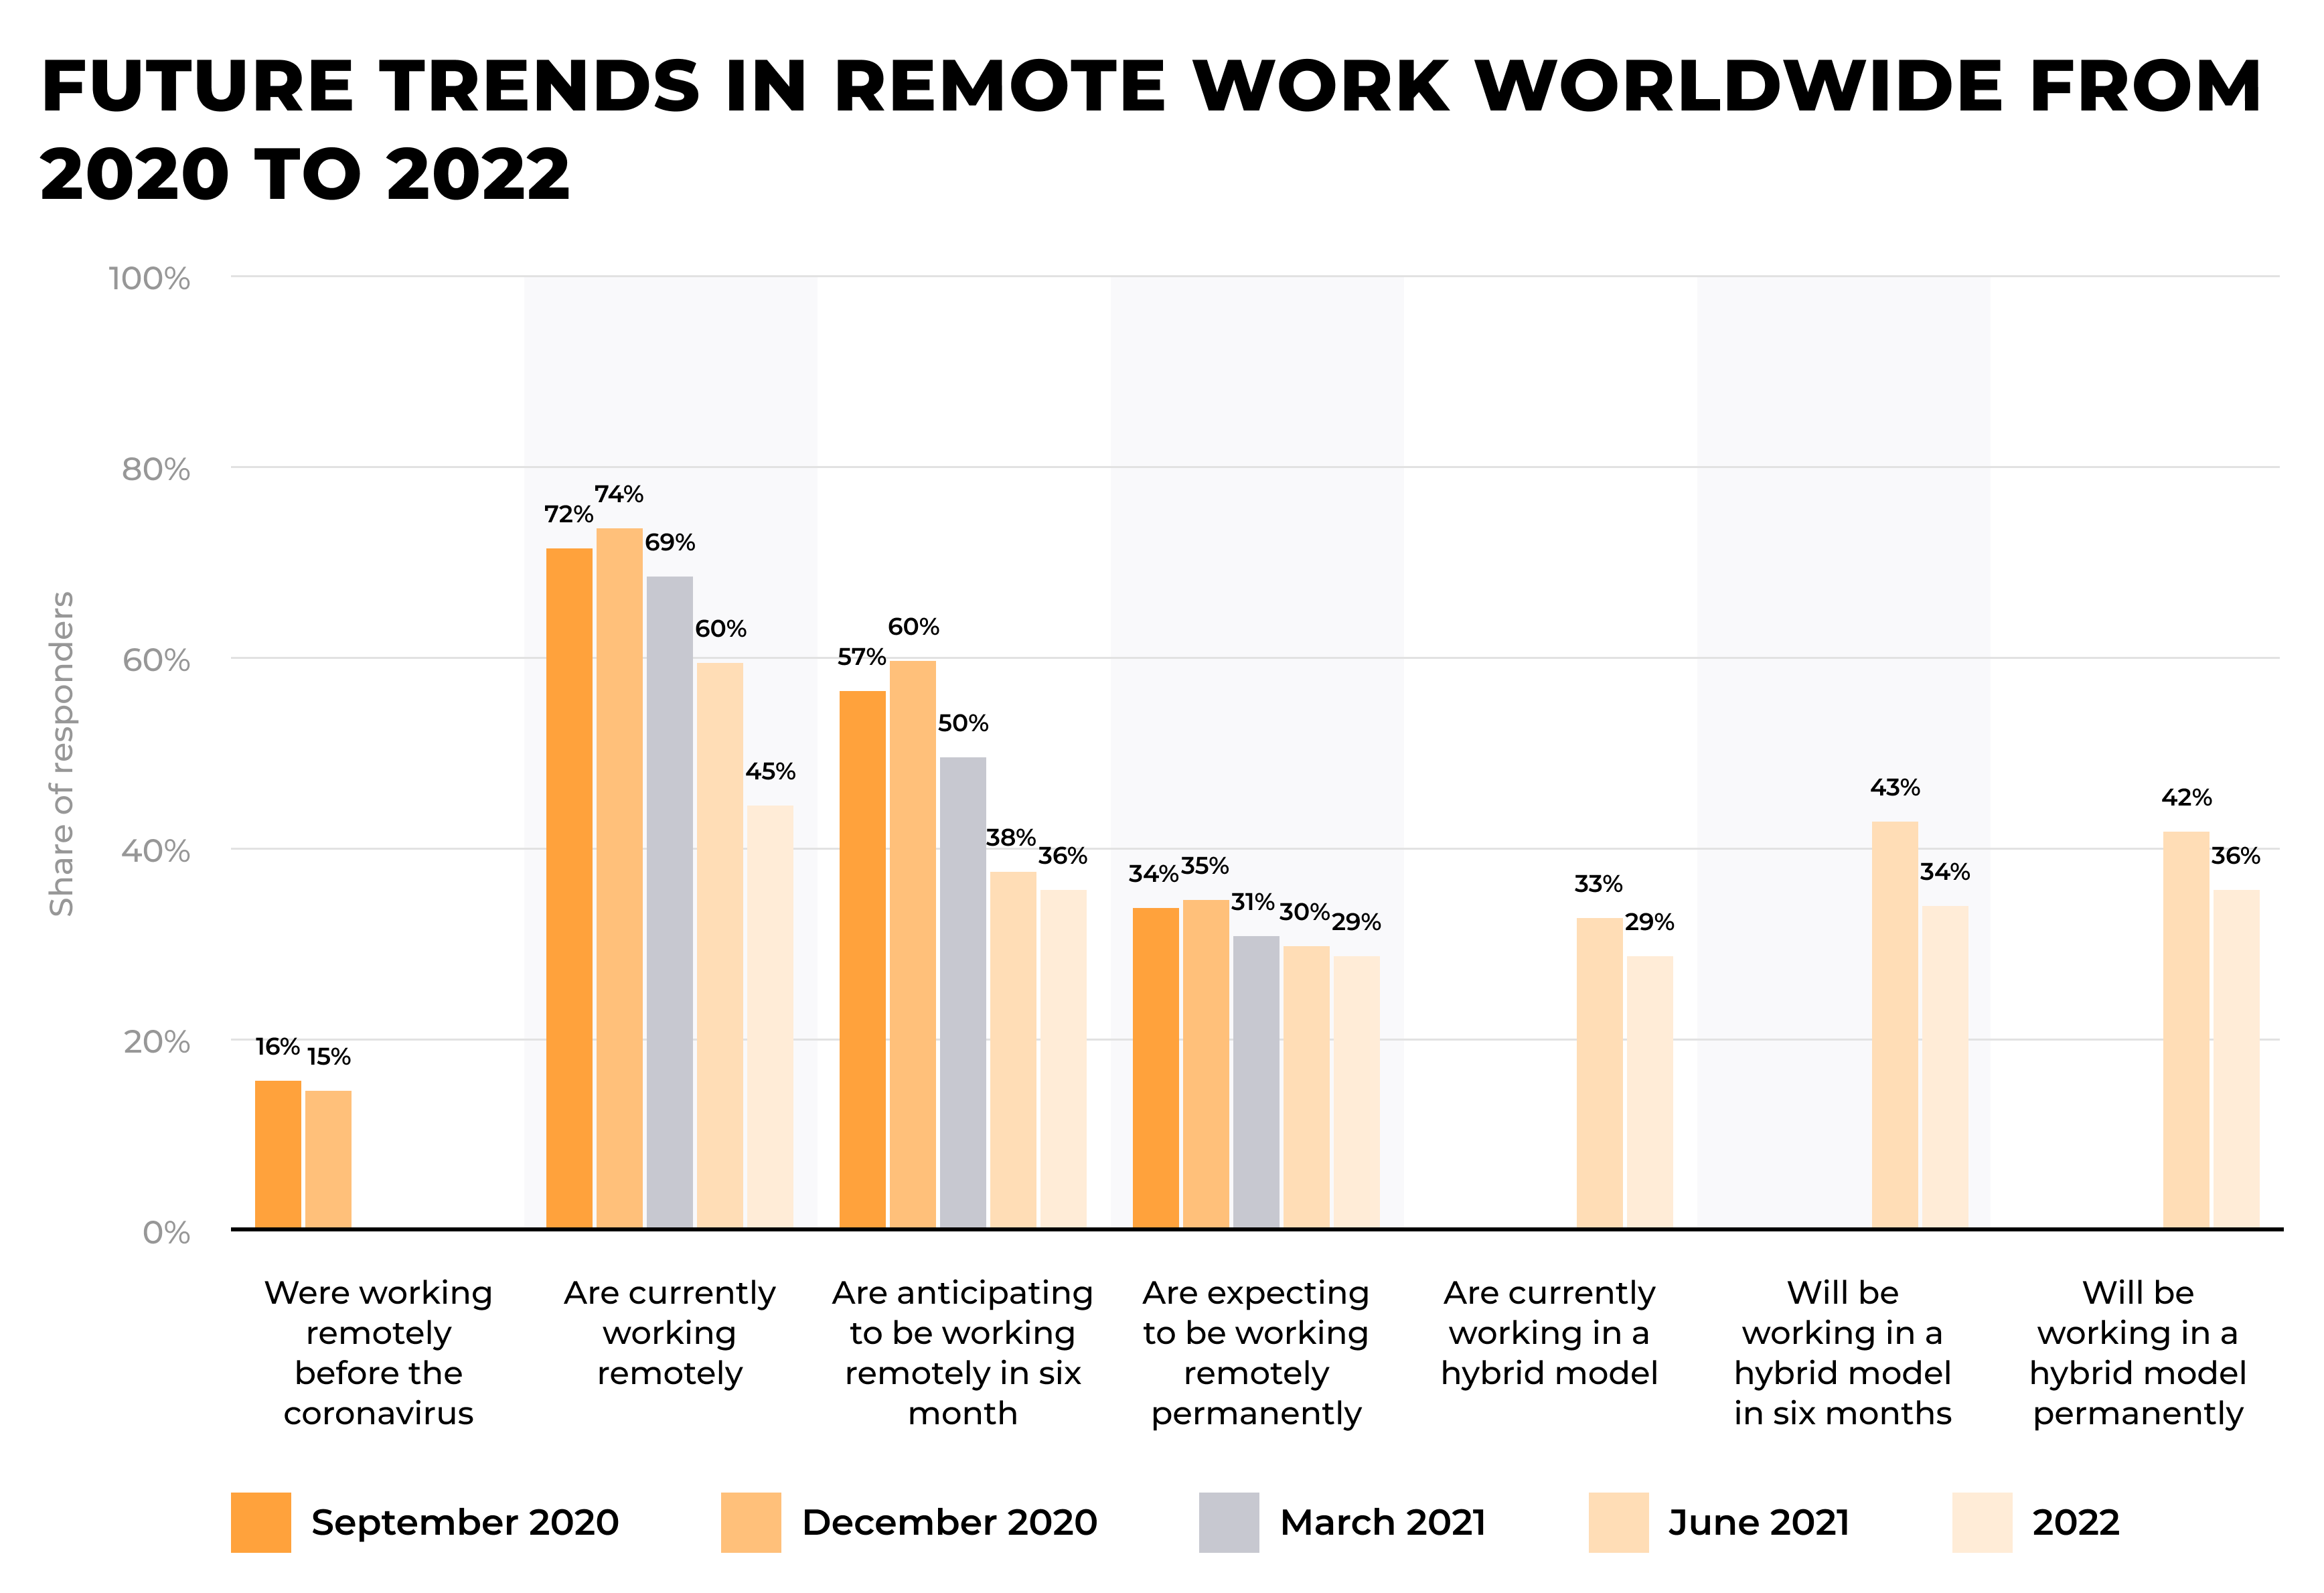 Future trends in remote work worldwide from 2020 to 2022